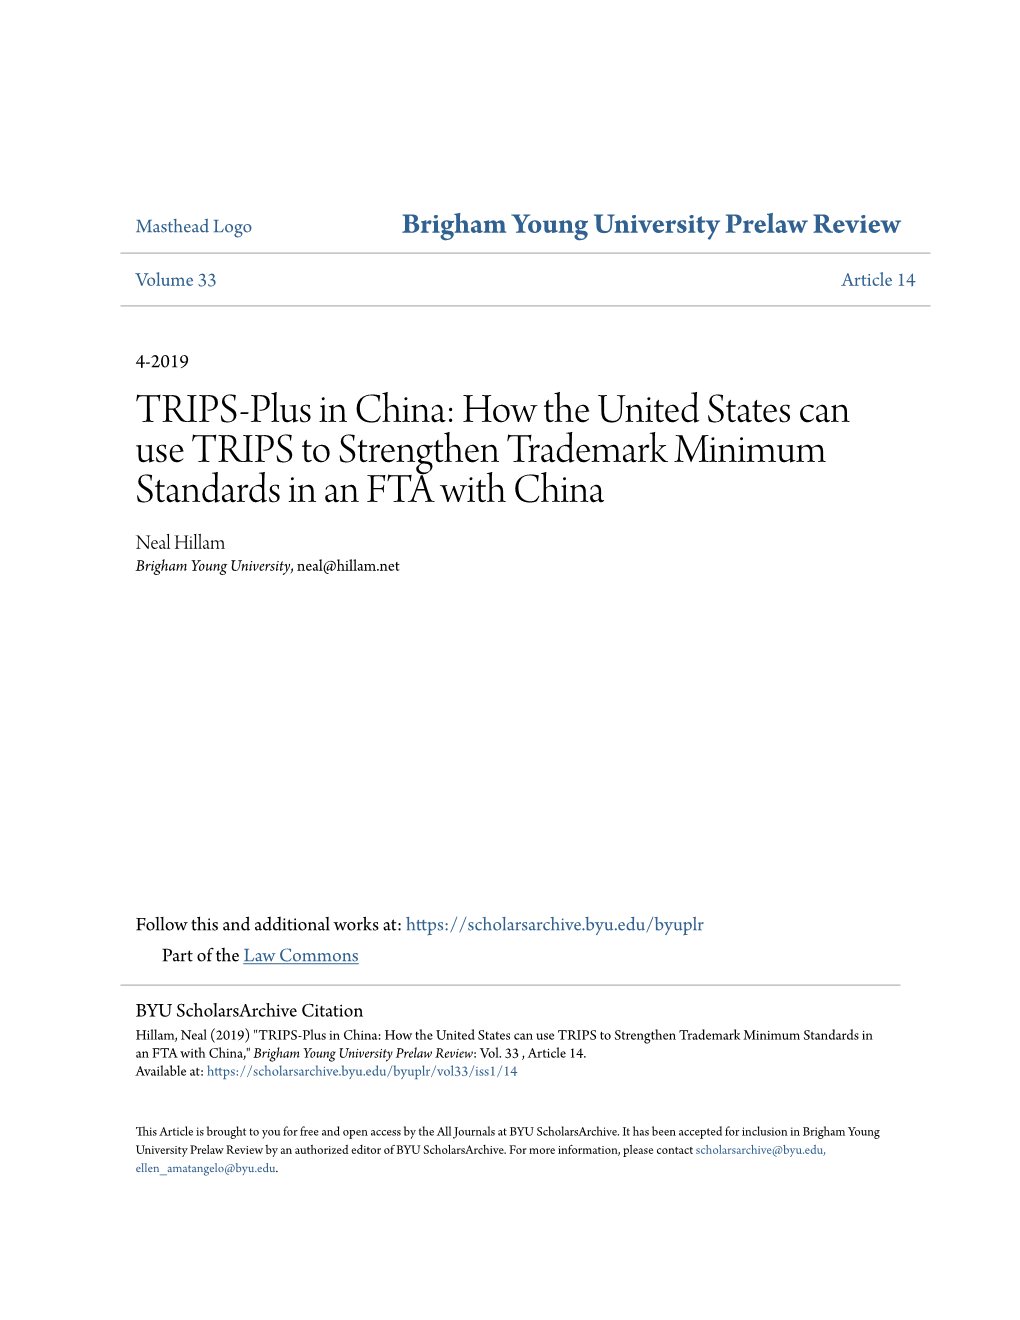 TRIPS-Plus in China: How the United States Can Use TRIPS to Strengthen